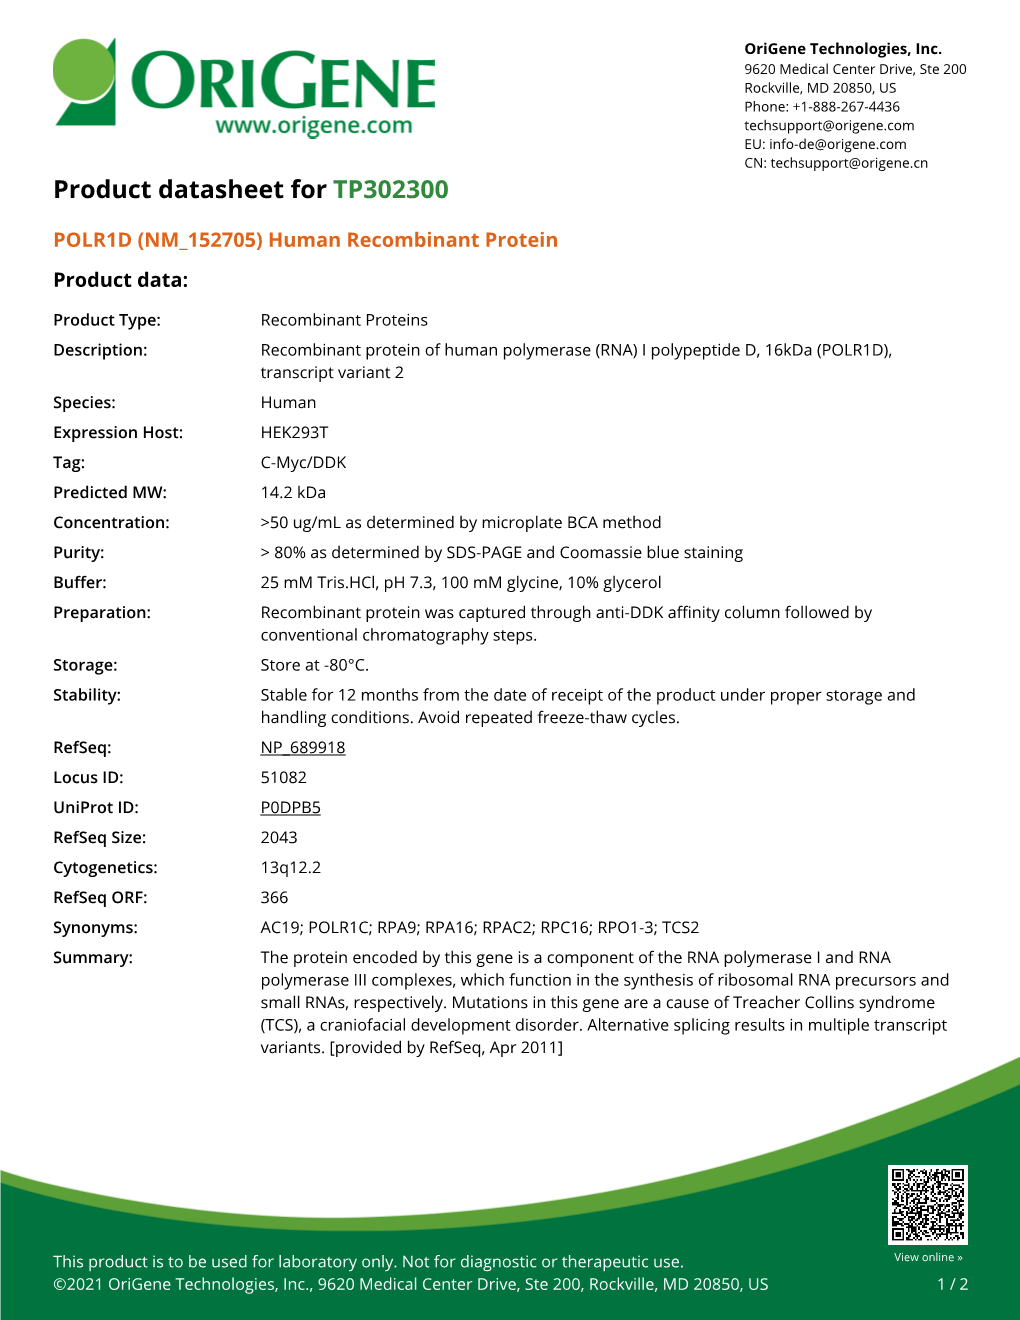 POLR1D (NM 152705) Human Recombinant Protein Product Data